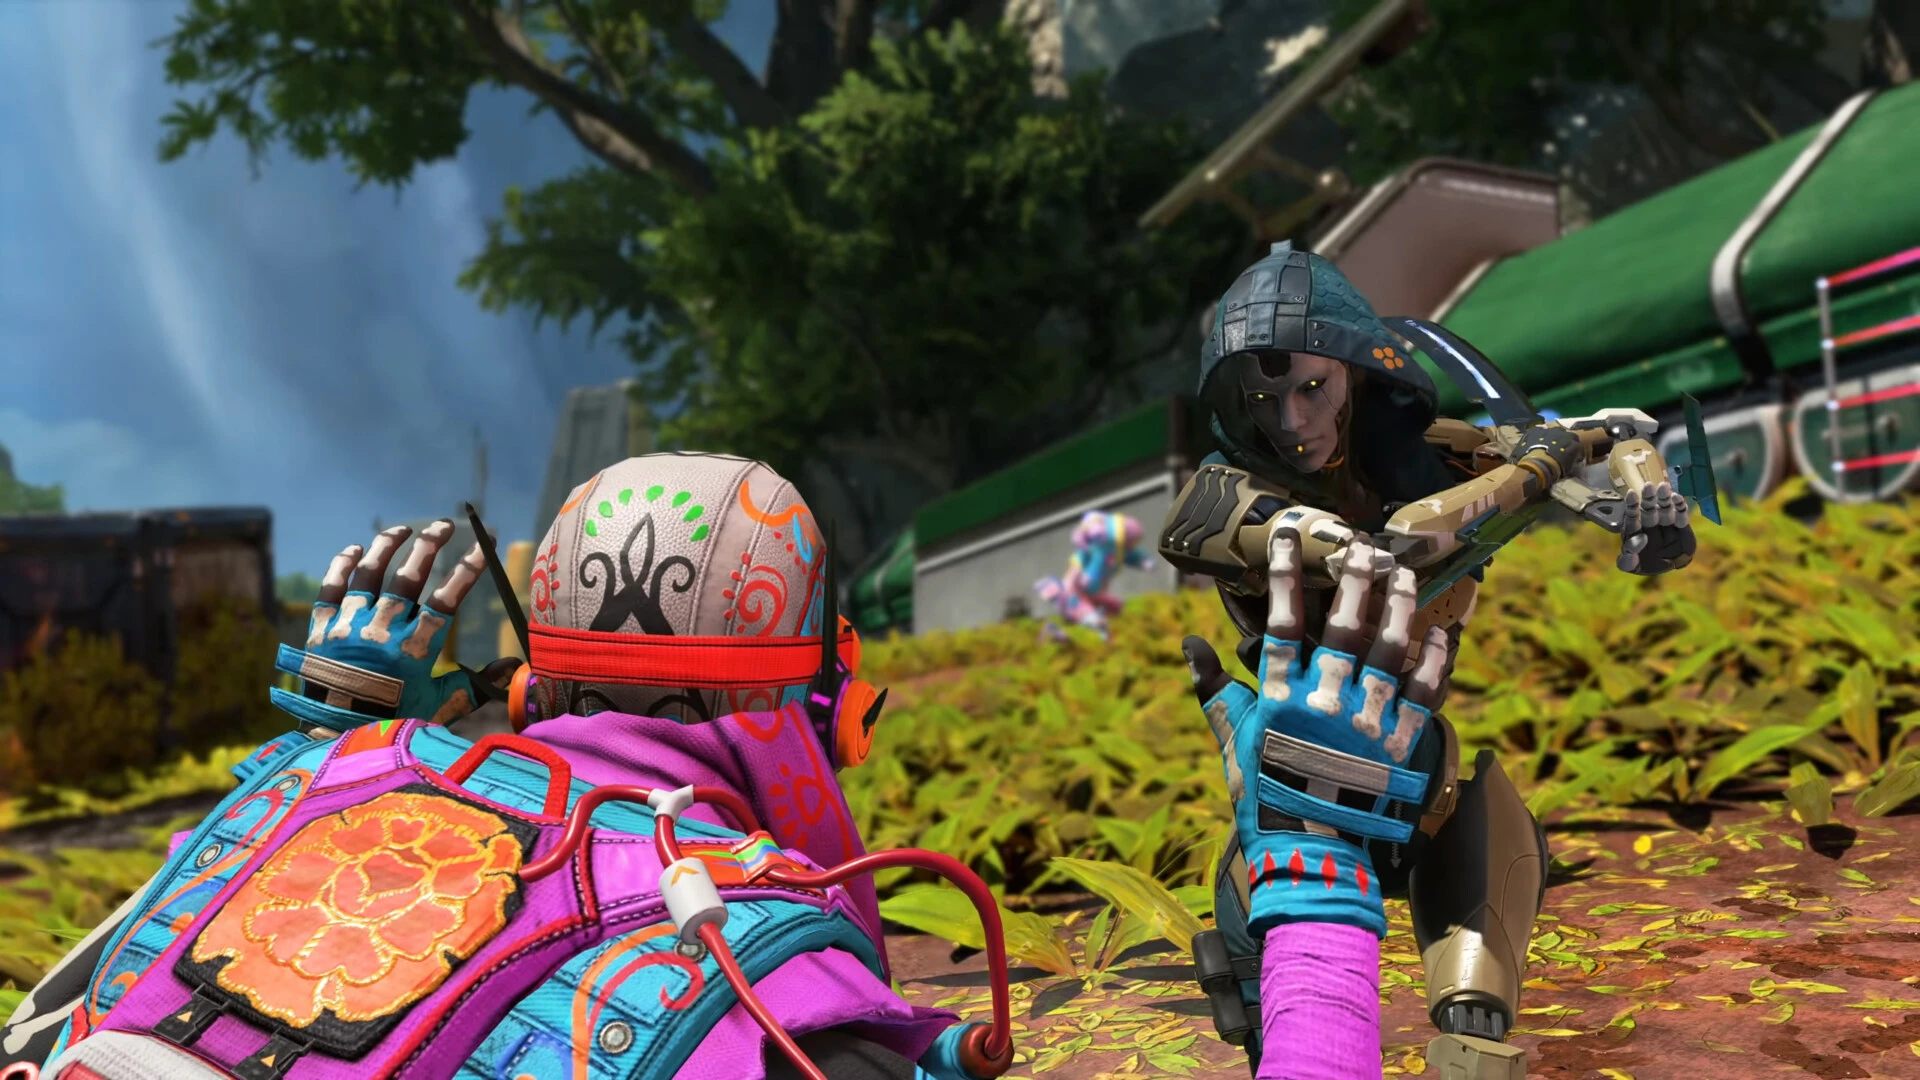 Ashs apex legends abilities detailed in new character trailer